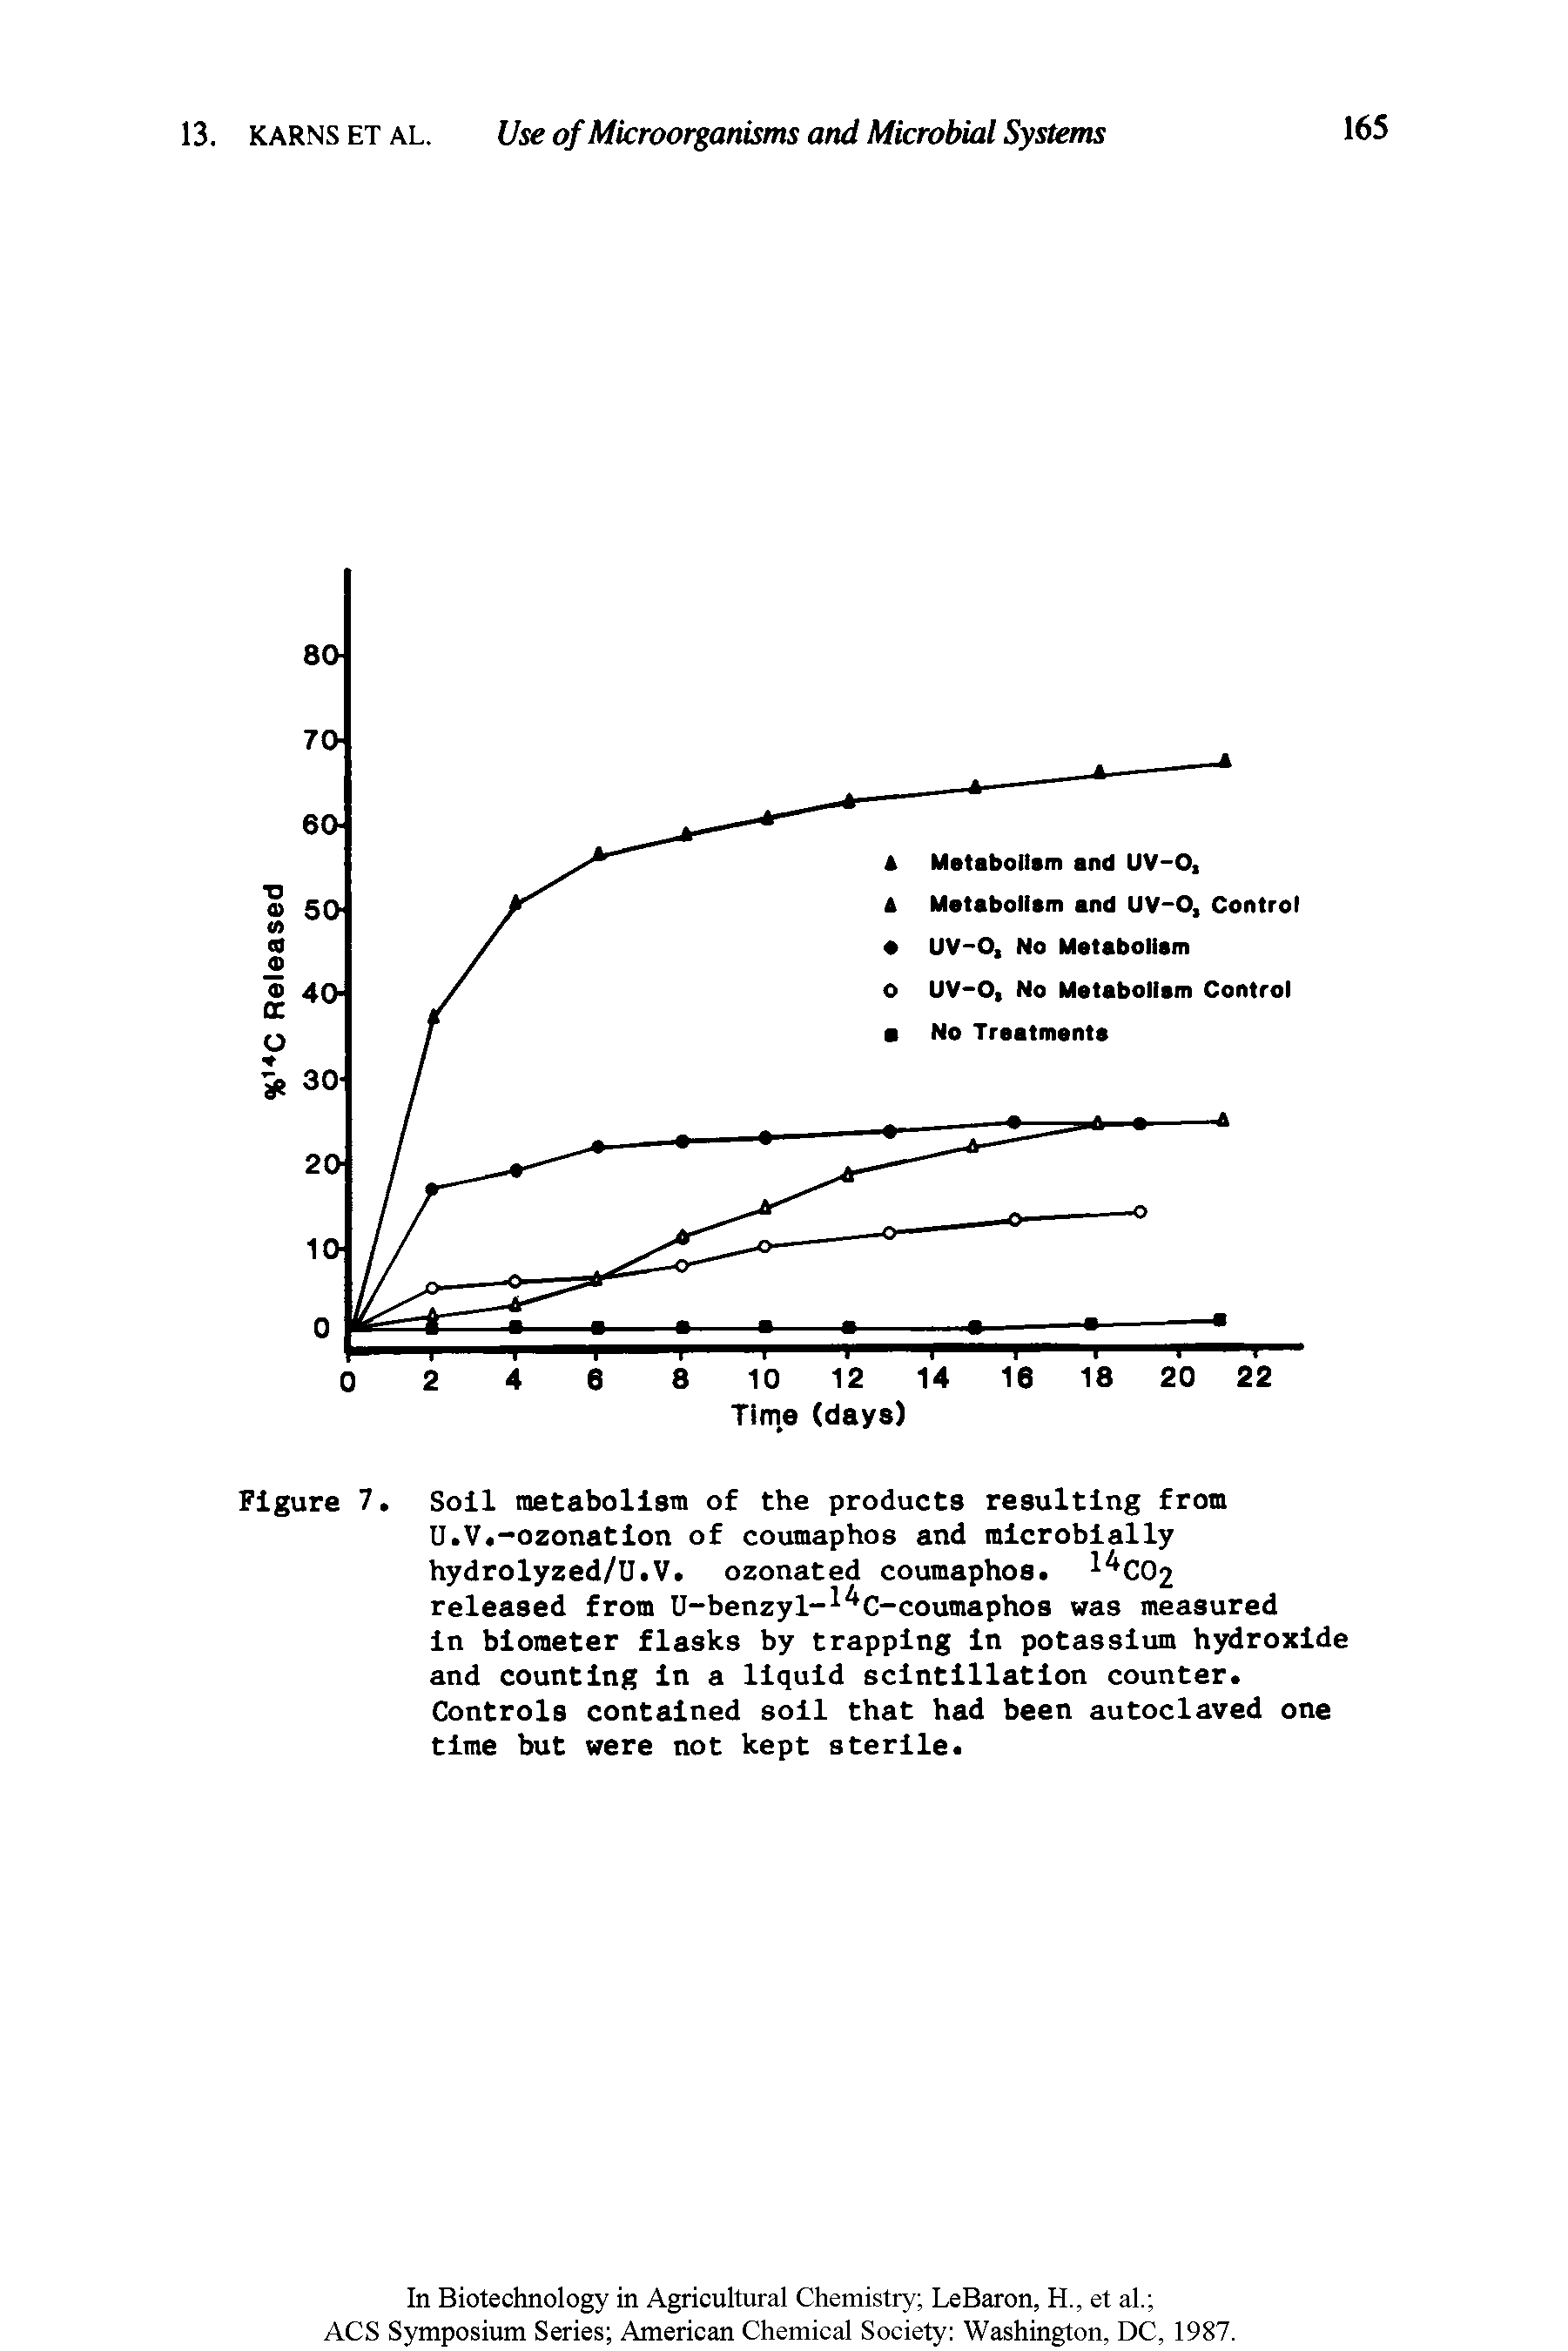 Figure 7. Soil metabolism of the products resulting from U.V.-ozonation of coumaphos and microbially hydrolyzed/U.V. ozonated coumaphos. C02 released from U-benzyl- C-coumaphos was measured in blometer flasks by trapping In potassium hydroxide and counting in a liquid scintillation counter. Controls contained soil that had been autoclaved one time but were not kept sterile.